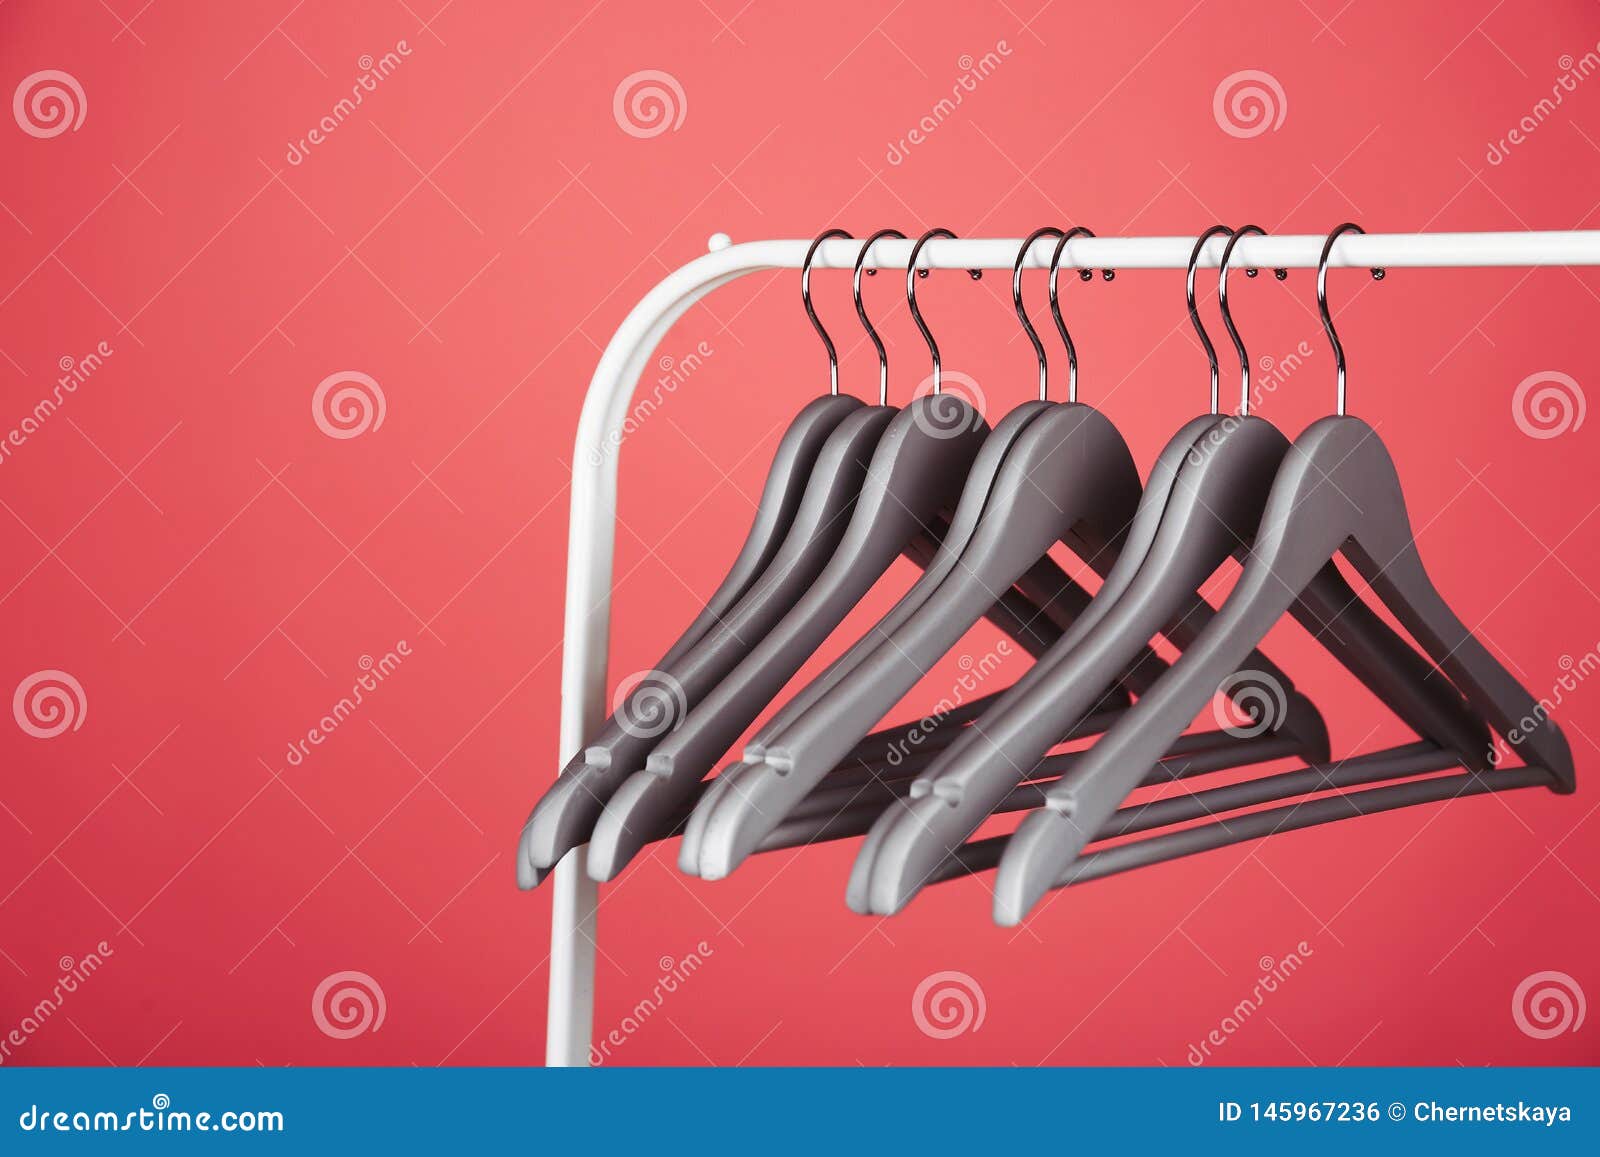 Empty Clothes Hangers On Metal Rack Against Color Background Stock ...